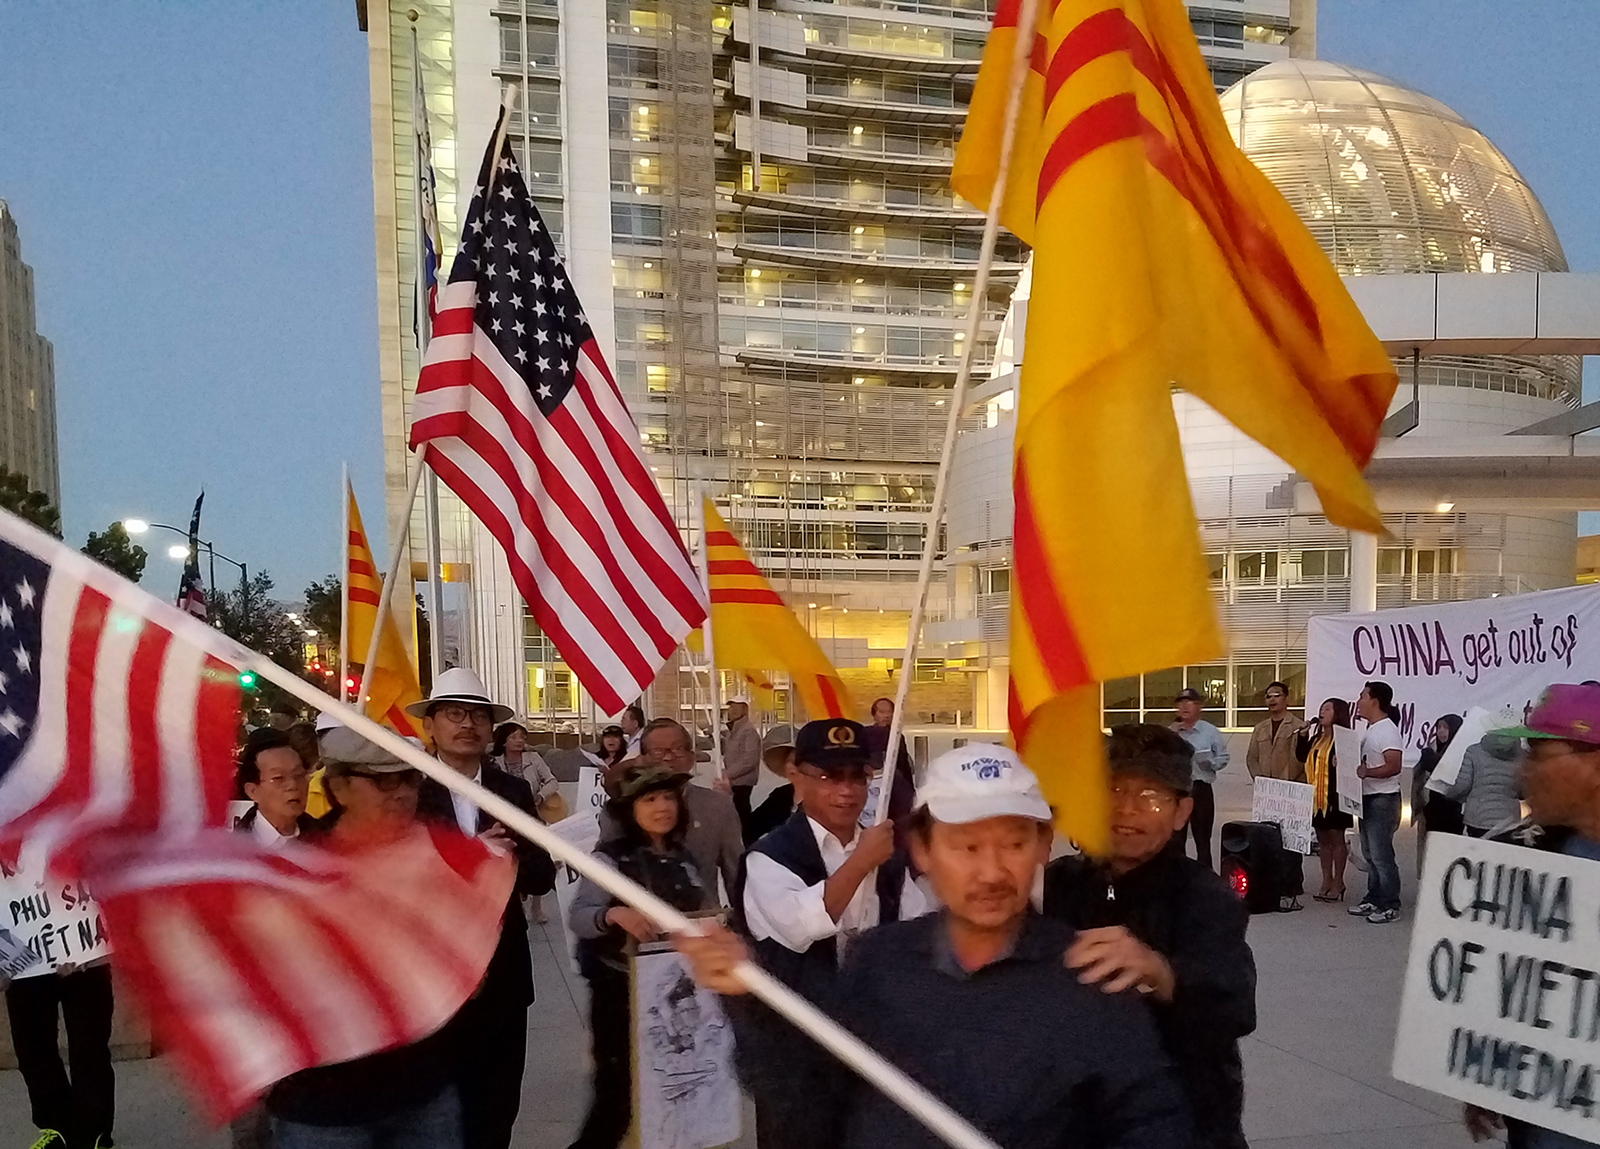 Vietnamese-American Protest against China, Photo by Jesus Nava Jr.